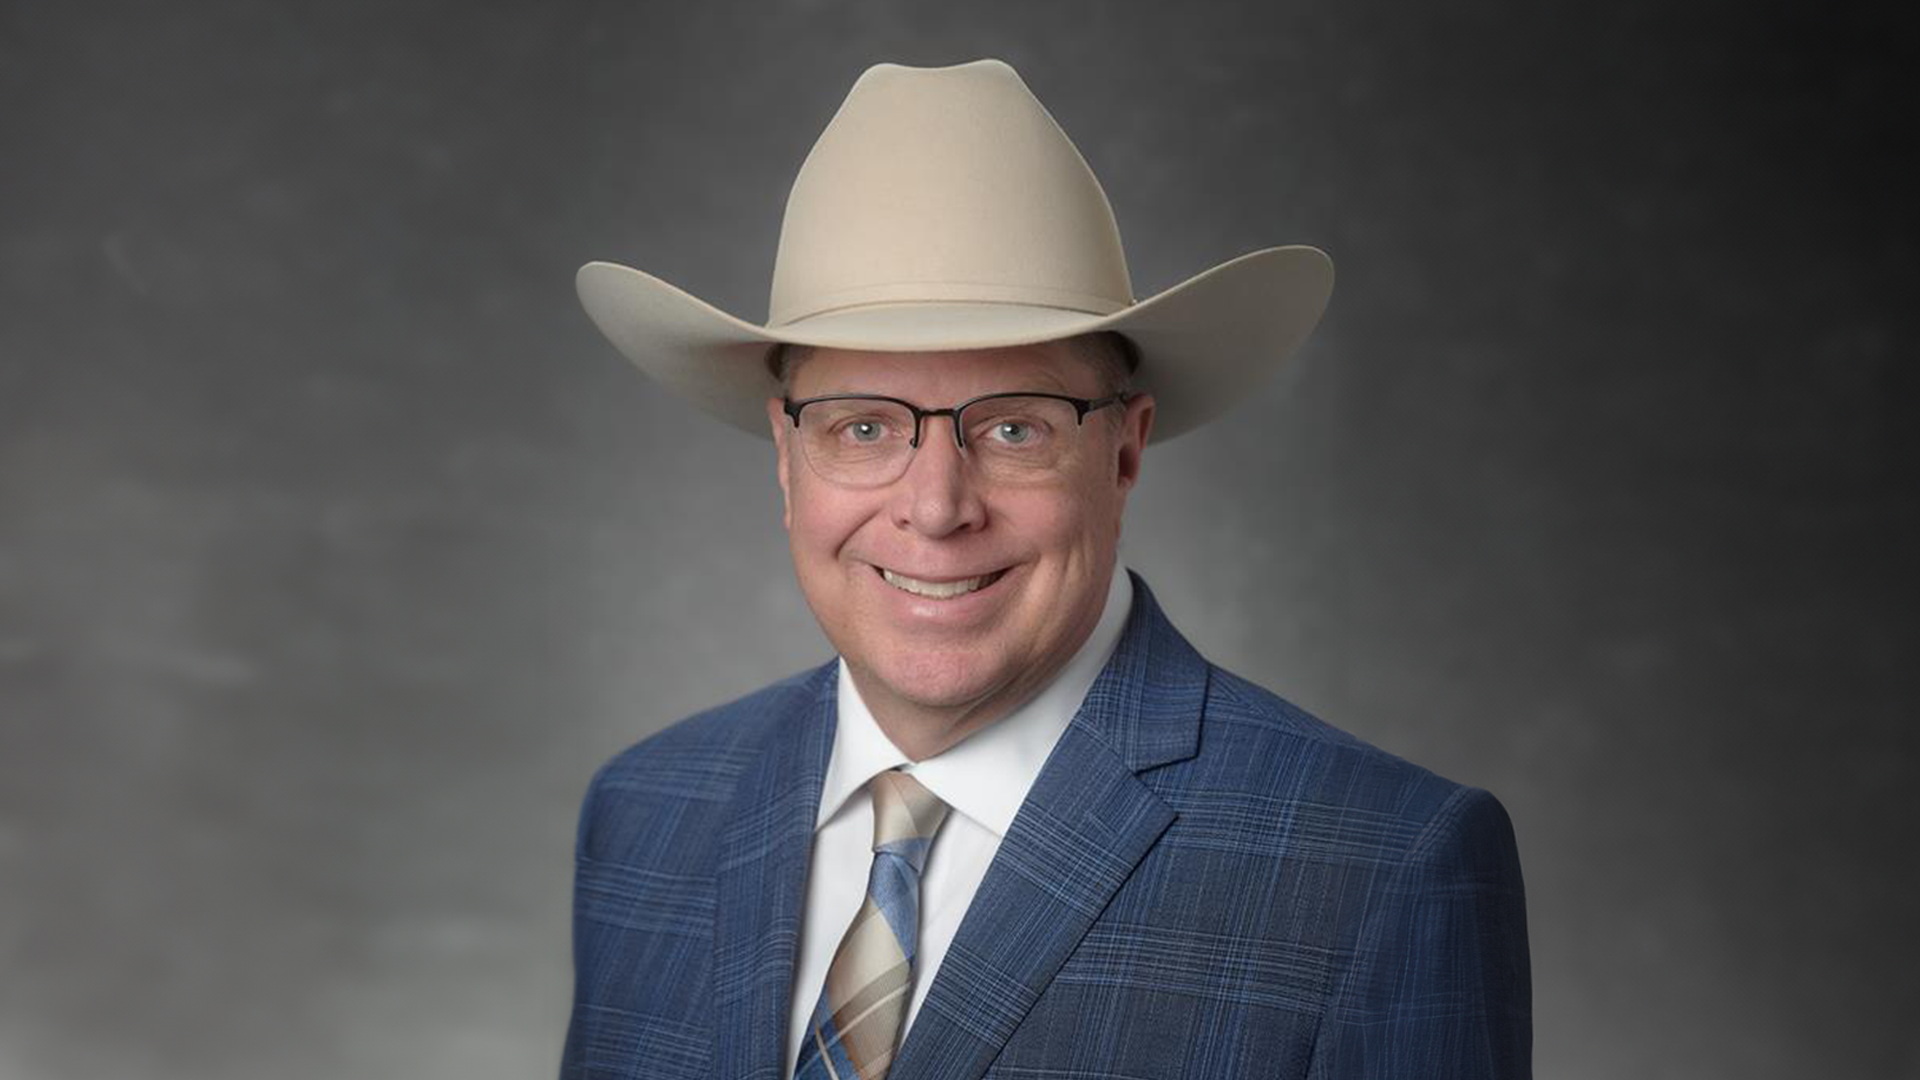 Steven Gumerman named new Chief Technology Officer at Rodeo